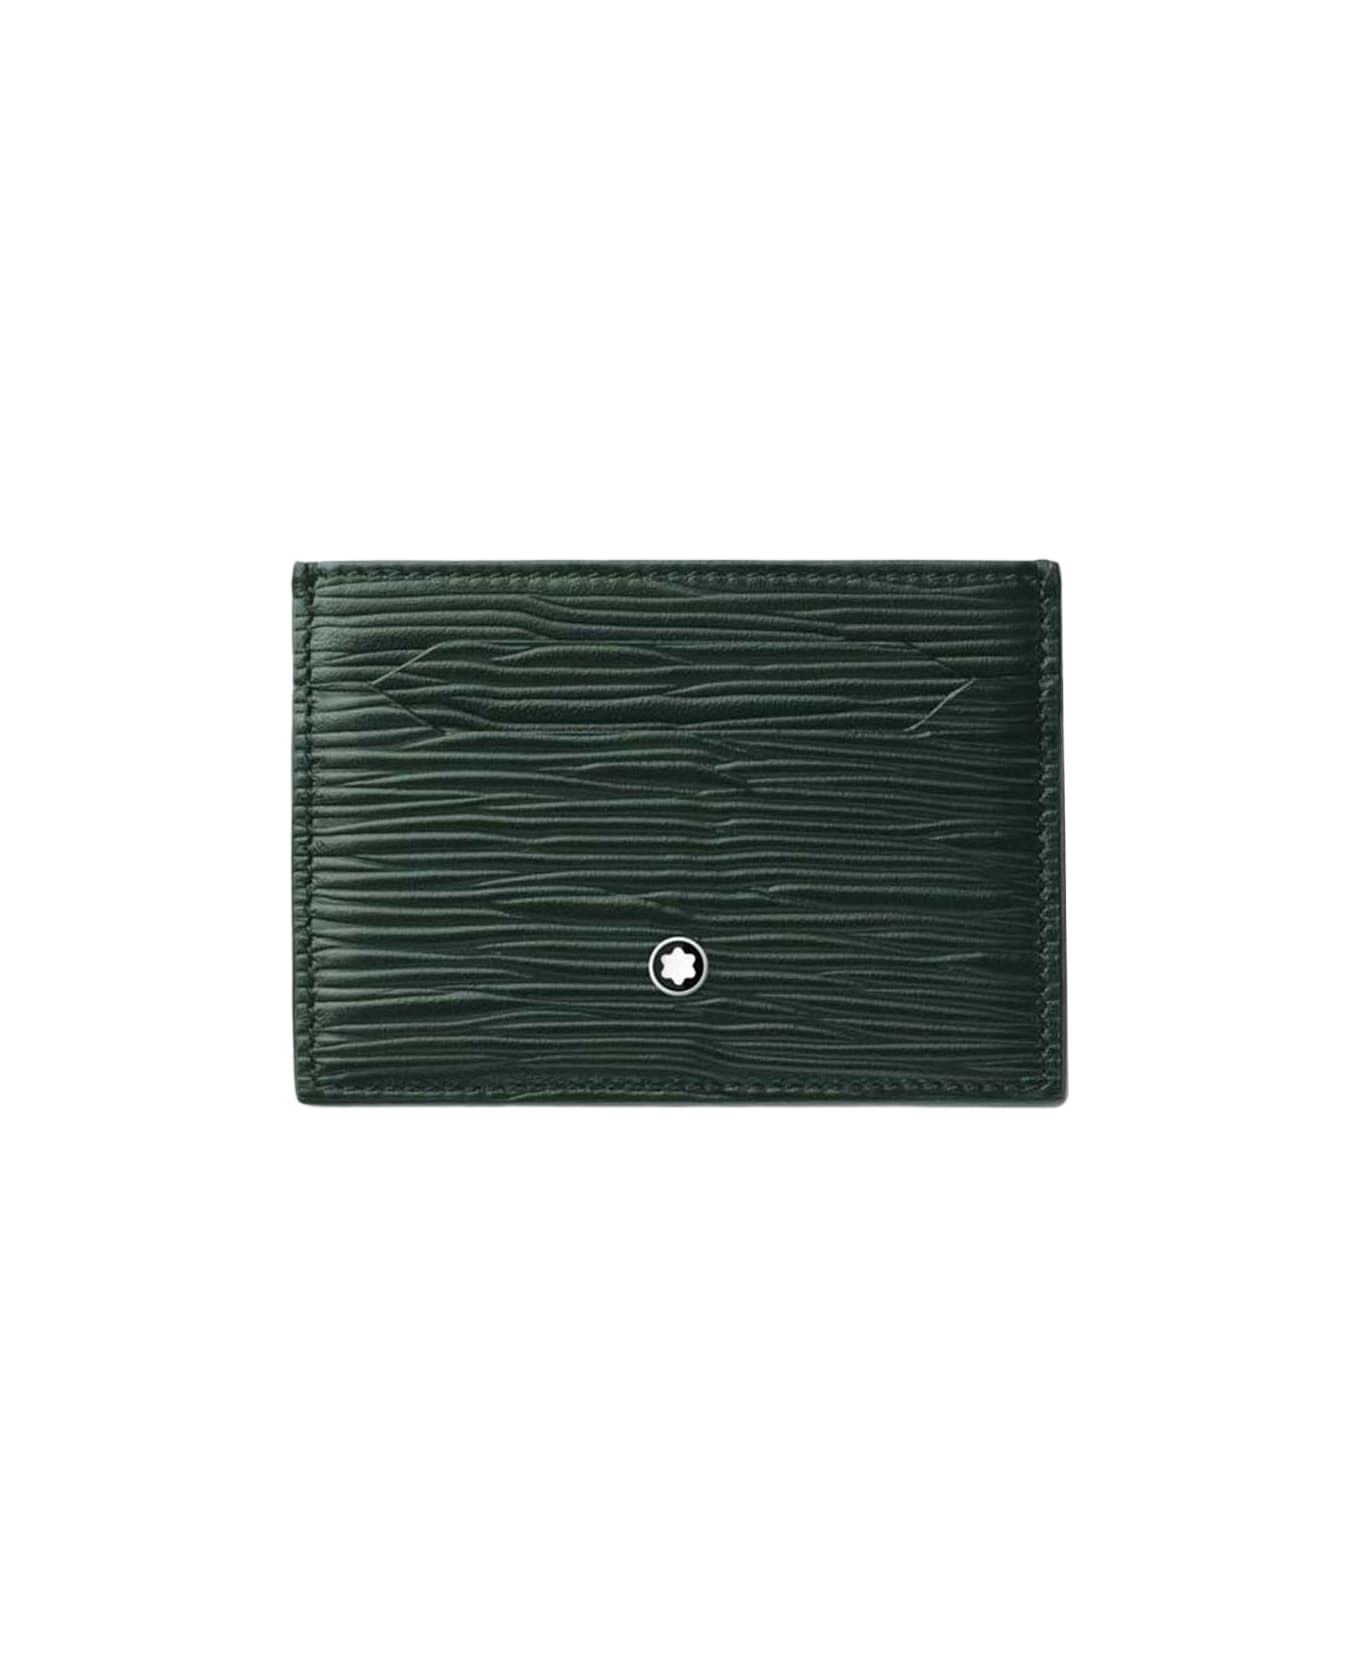 Montblanc Card Case 5 Compartments Meisterstuck - Green